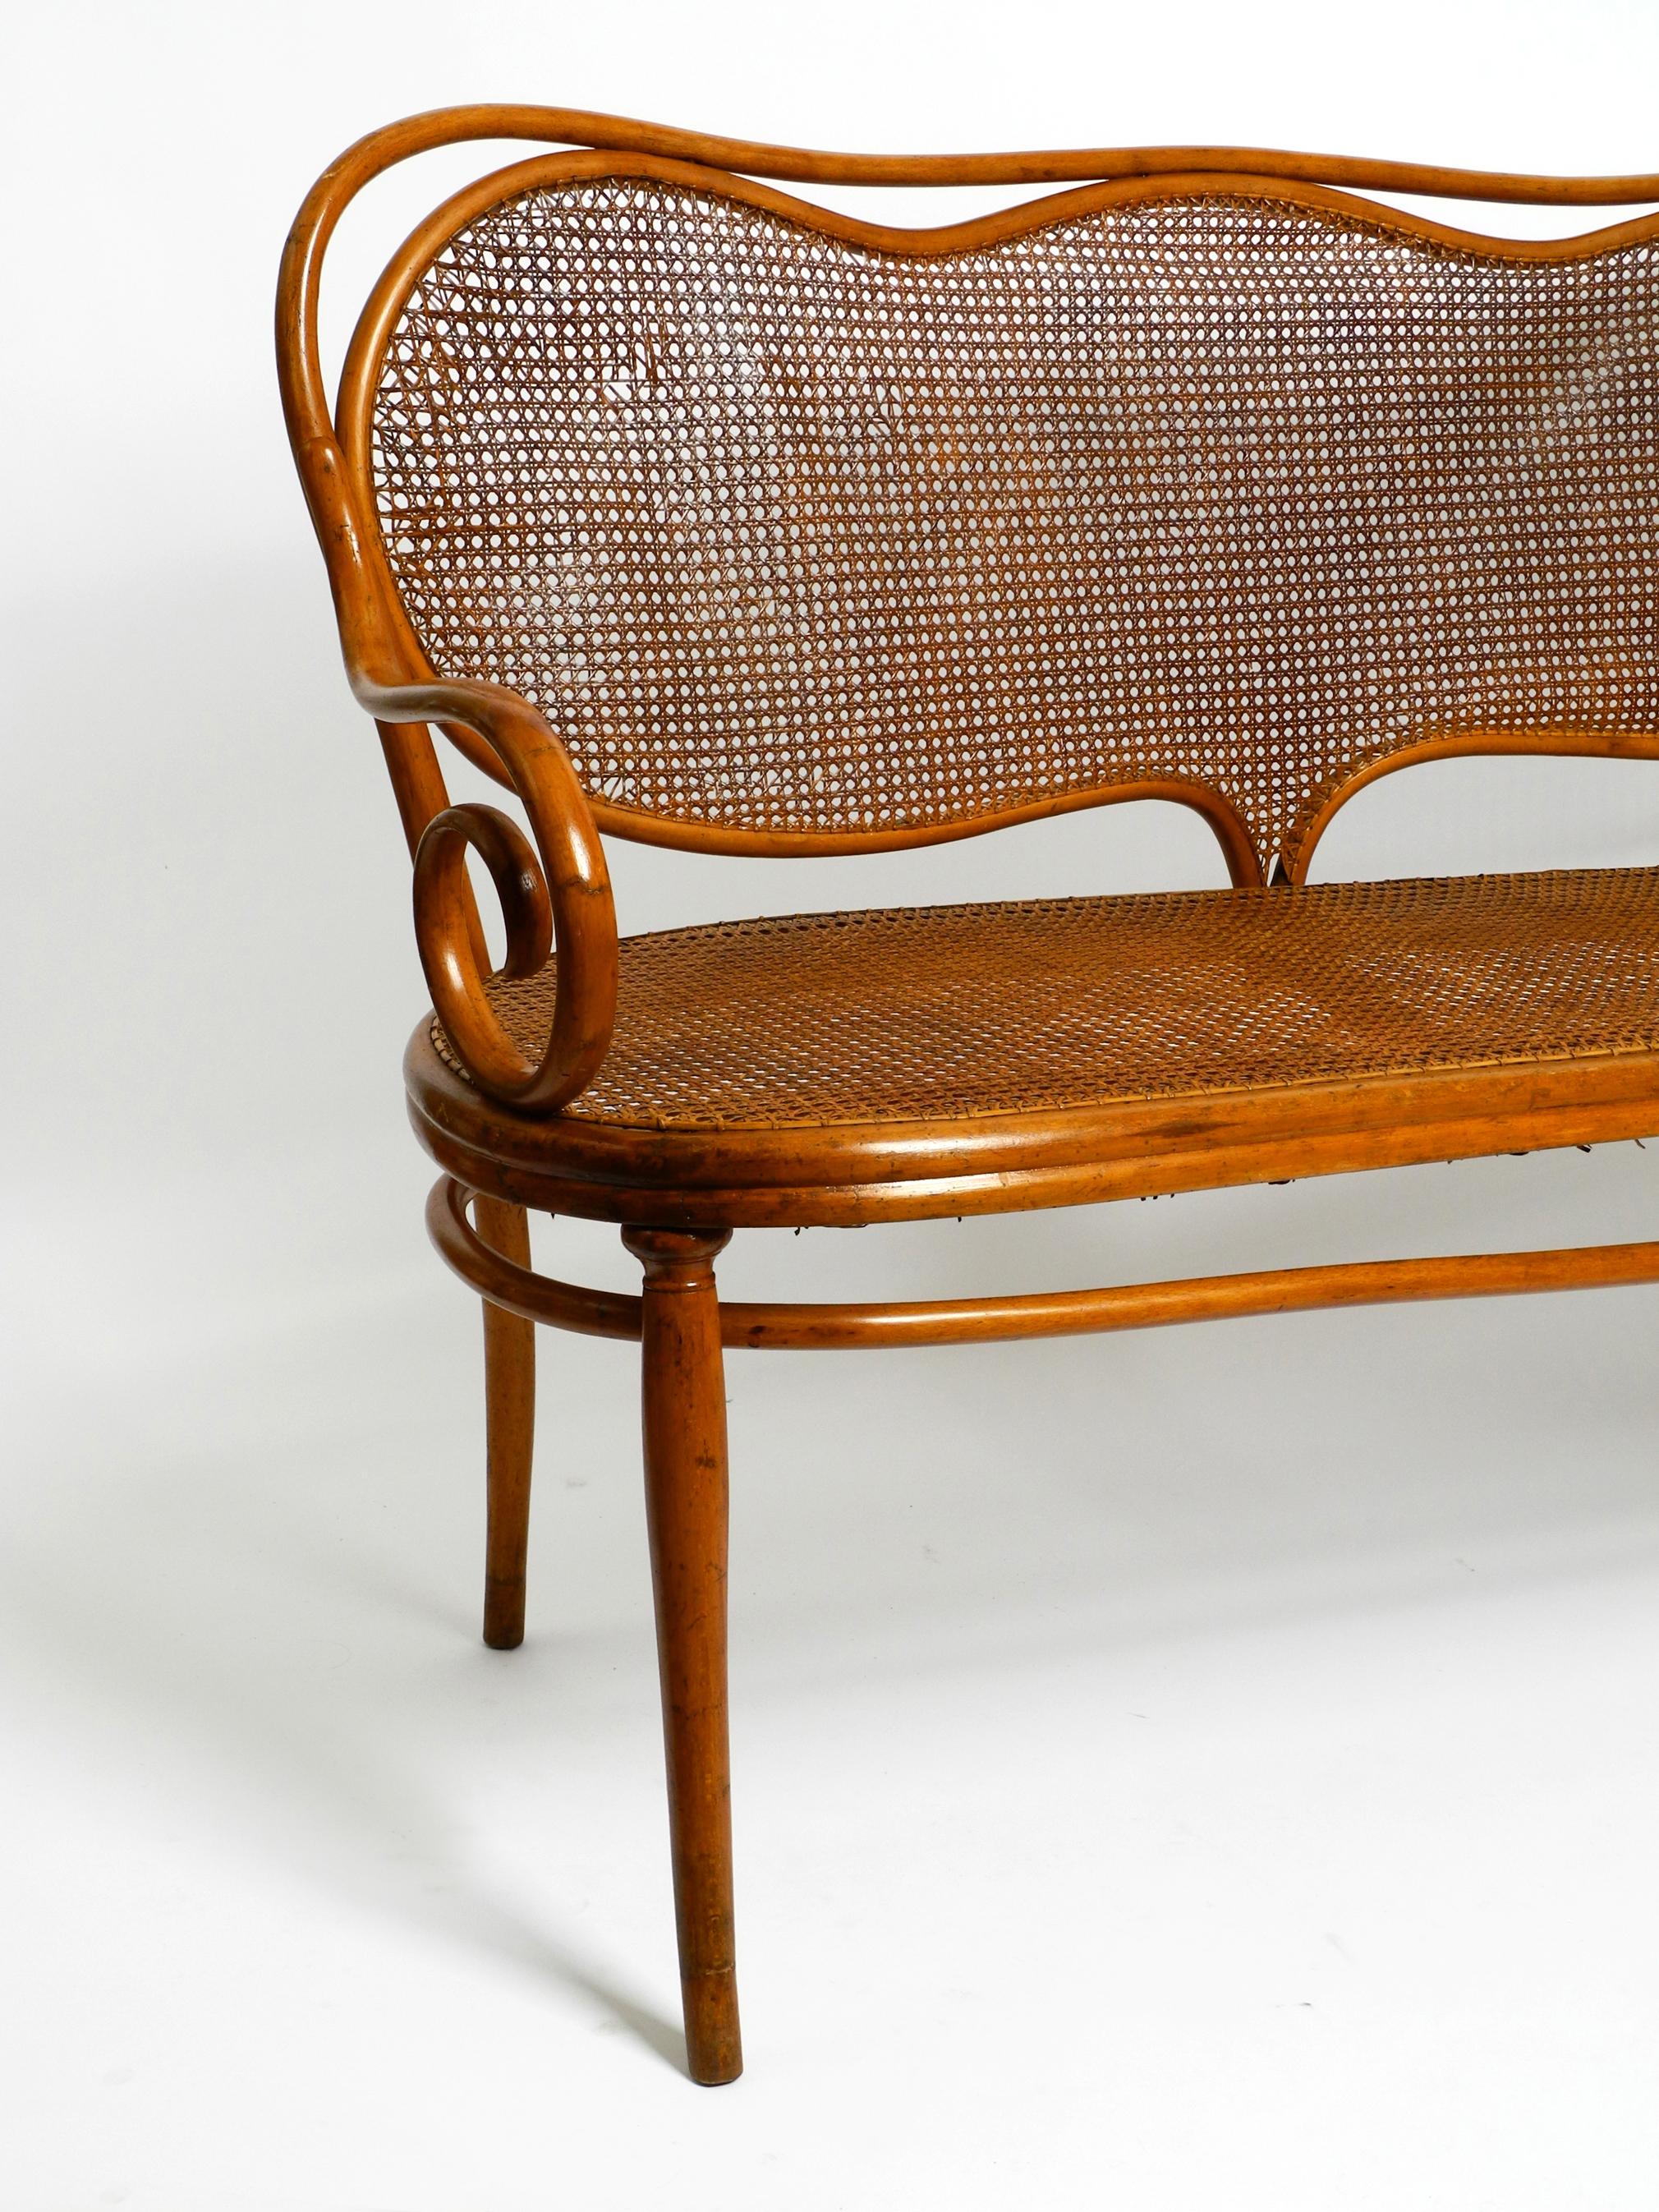 Bench No. 5 Thonet 1858 made of bent beech and wickerwork  restoration needed For Sale 13